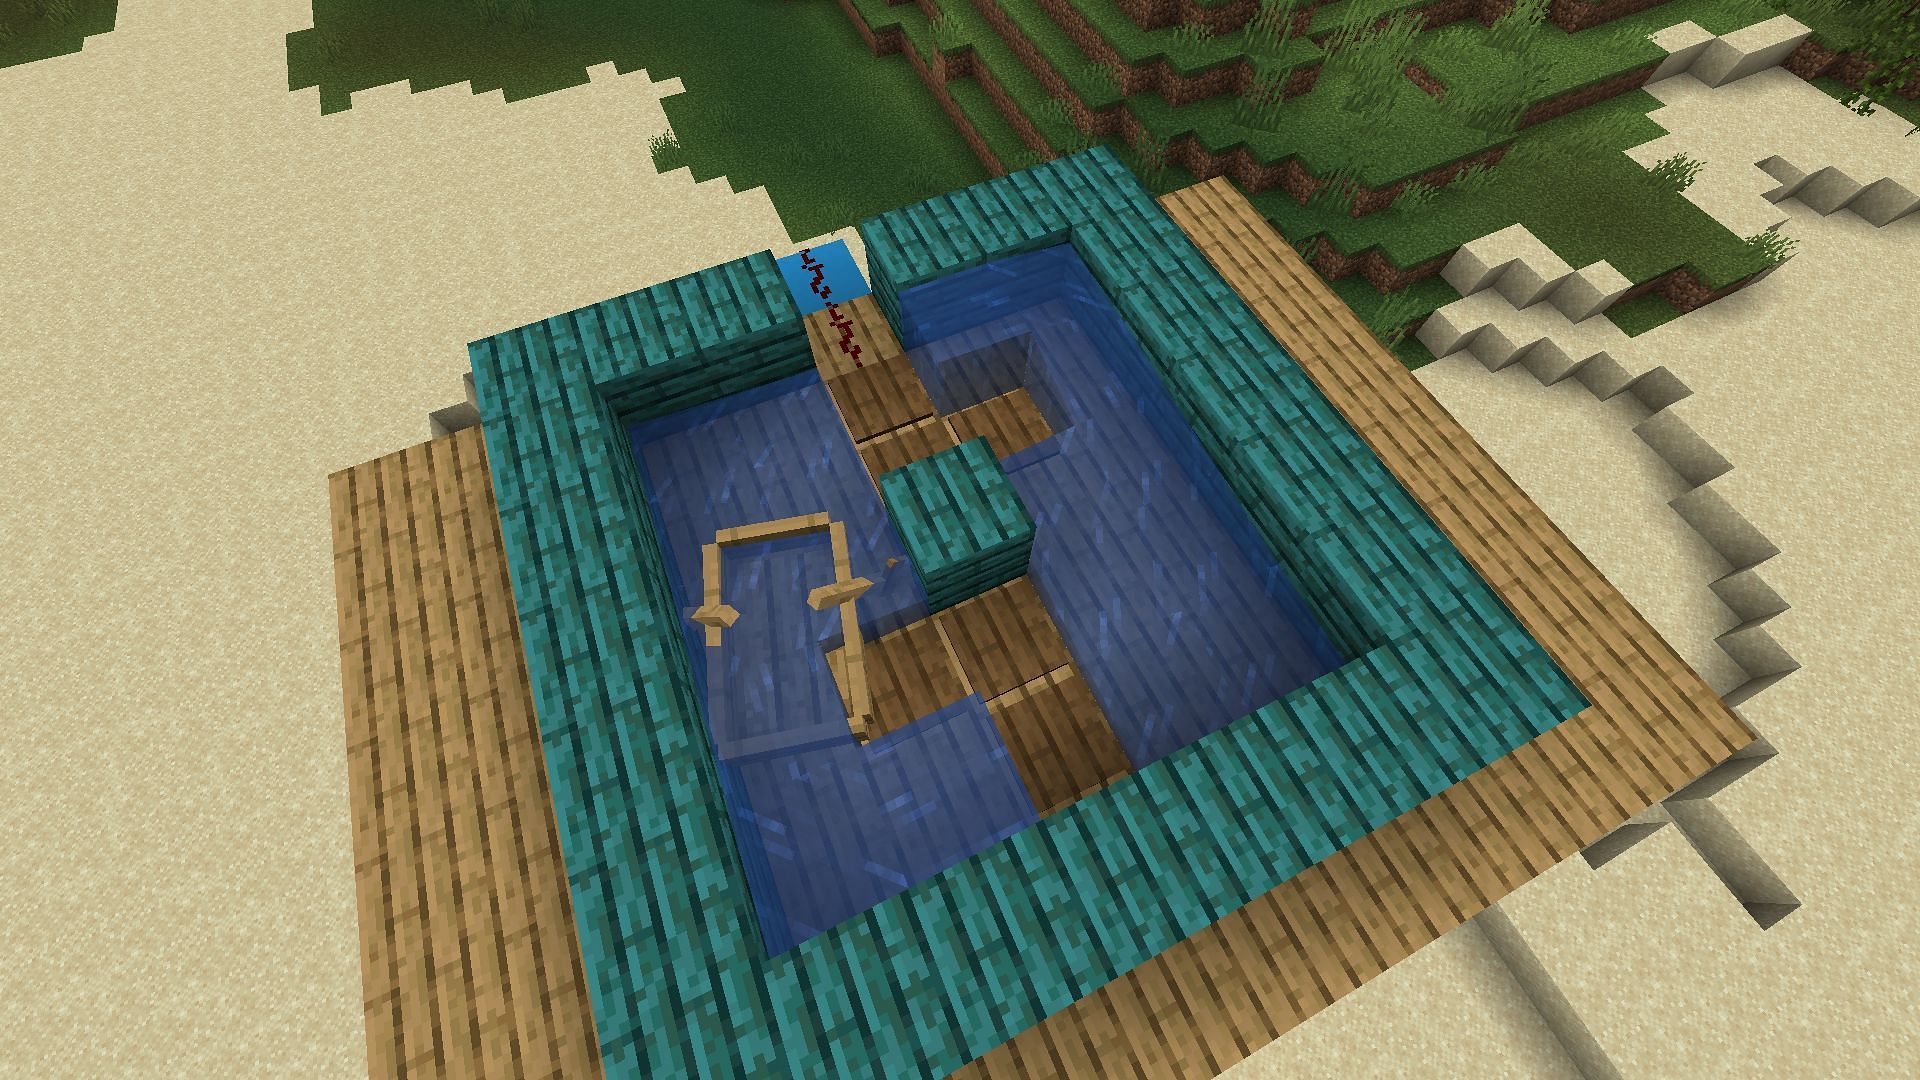 A redstone clock at the top of the Minecraft build utilizing pressure plates and boats (Image via Mojang)